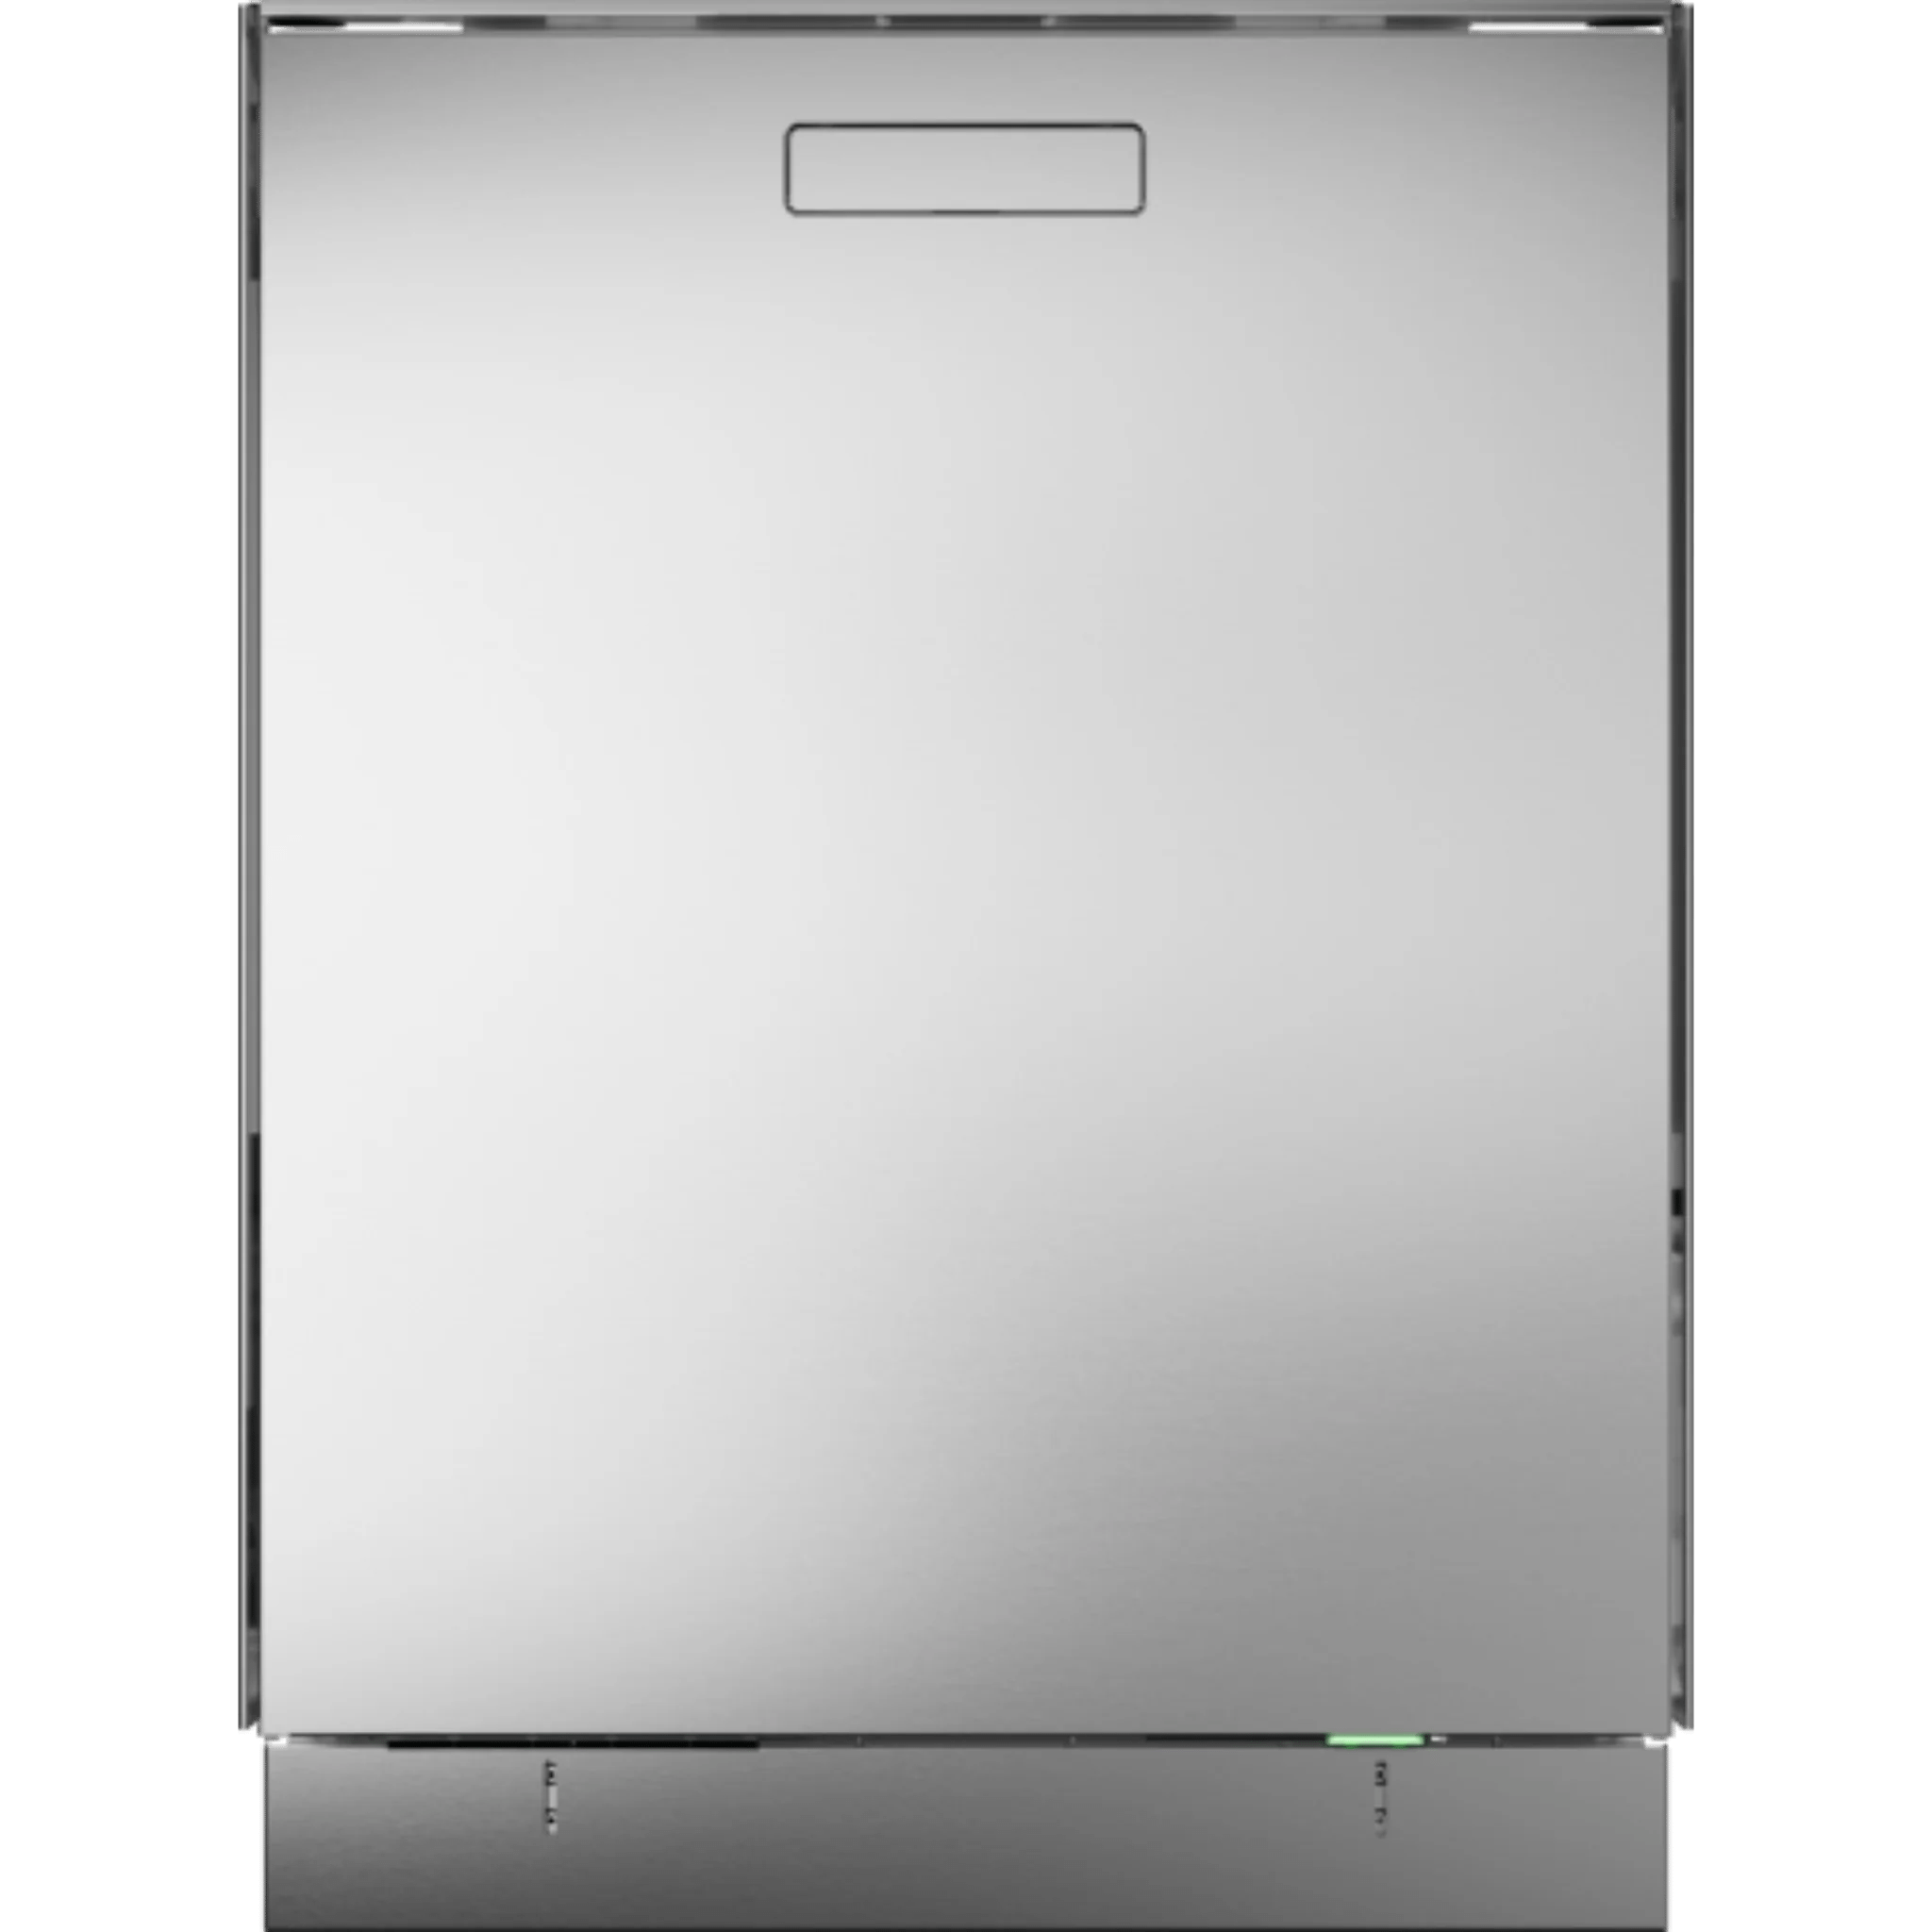 Asko Logic 24 Inch Wide 16 Place Setting Built-In Top Control Dishwasher with Pocket Handle, XXL Tub, Turbo Combi Drying™, and Auto Door Open Drying™ Dishwashers DBI564IXXLS Luxury Appliances Direct